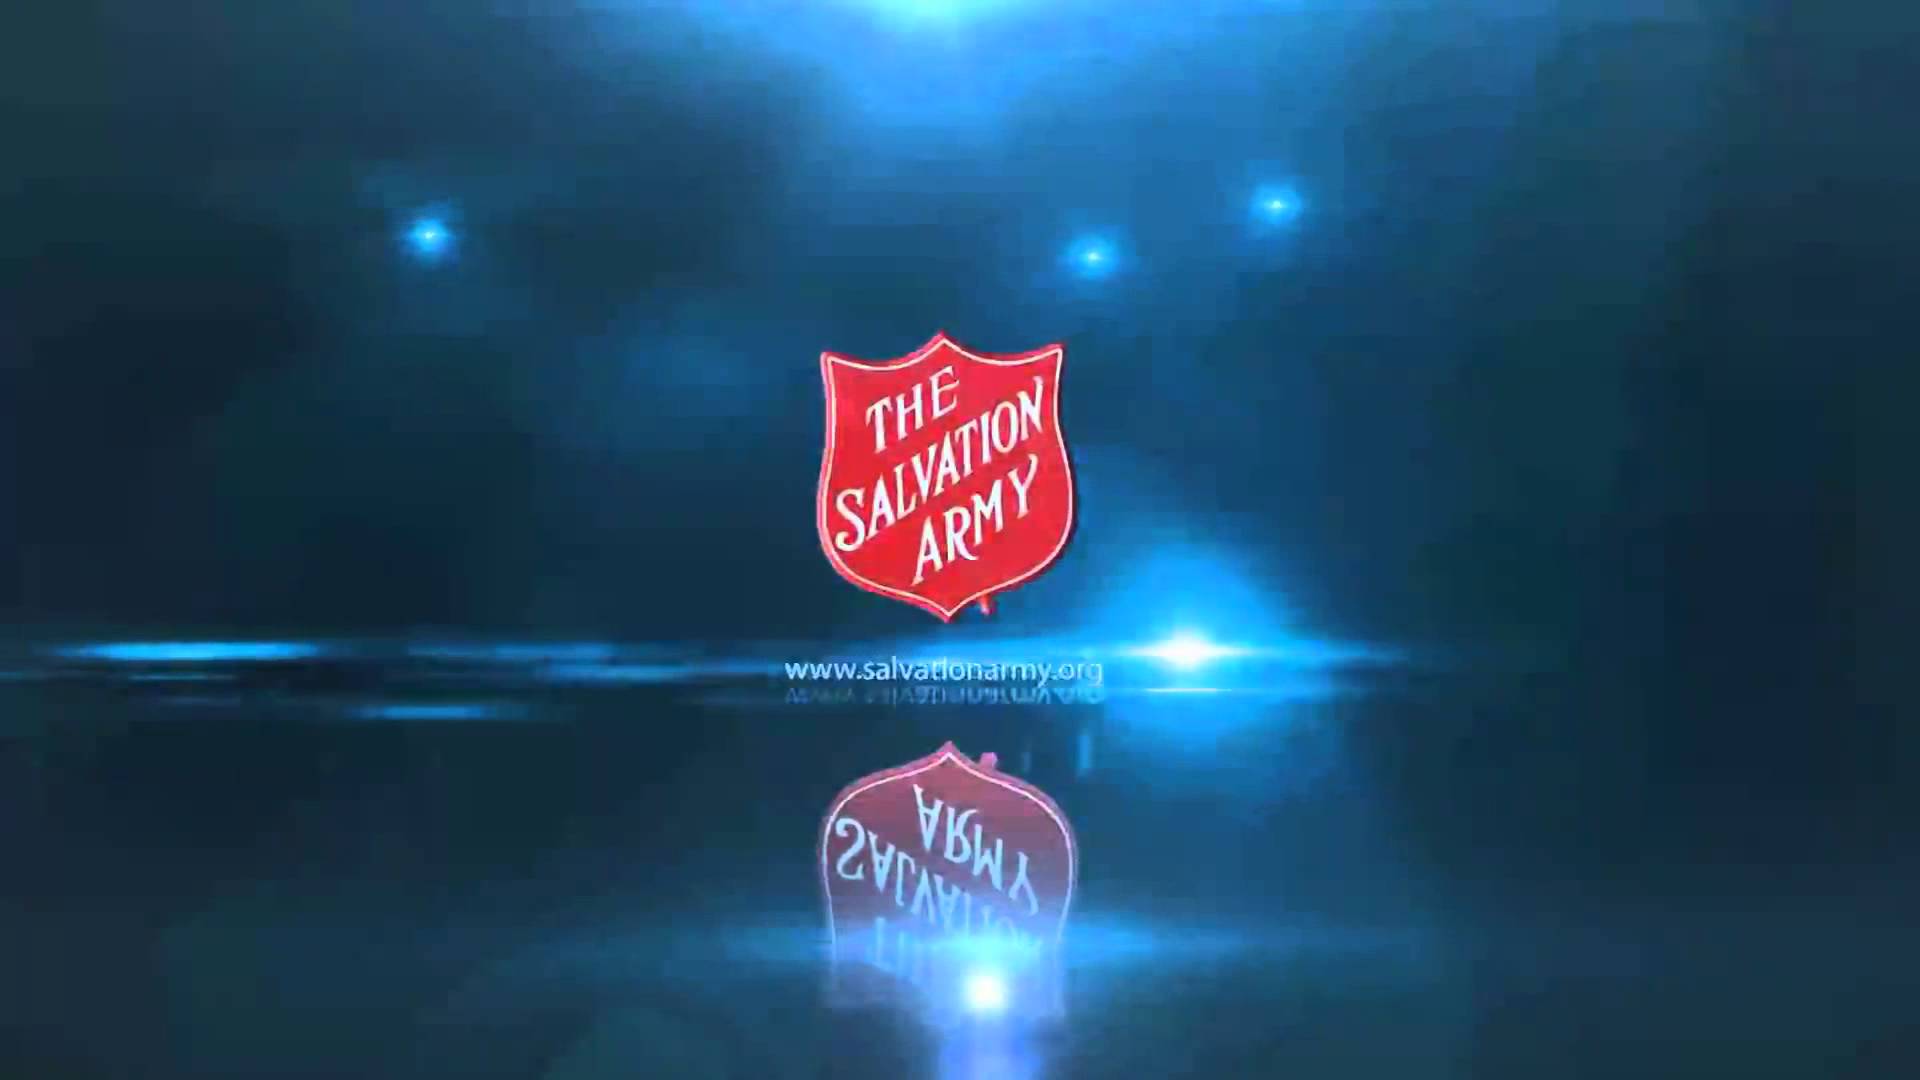 Testing the salvation army logo.